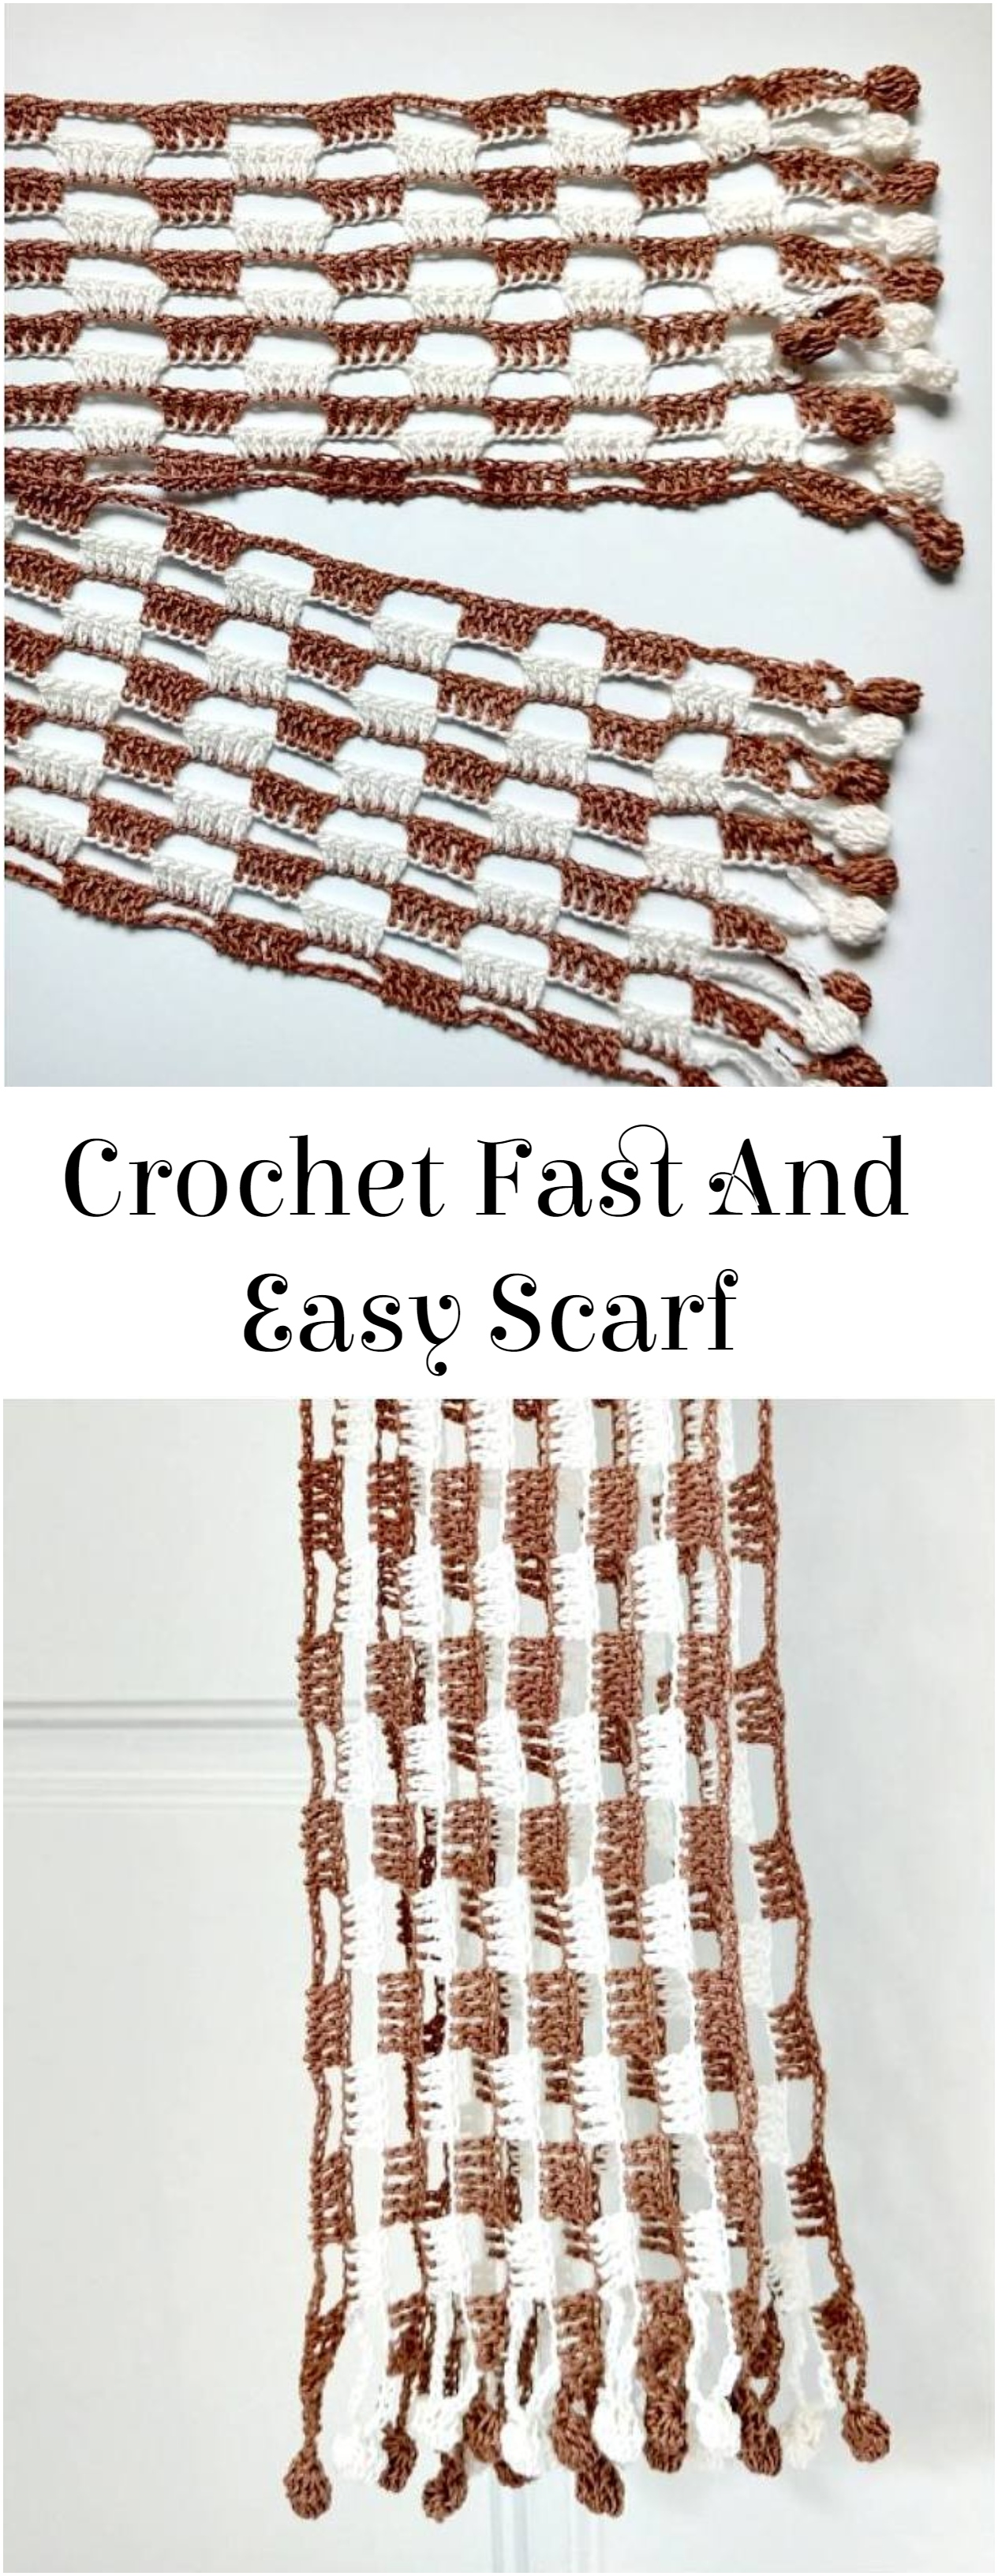 Crochet Fast And Easy Scarf